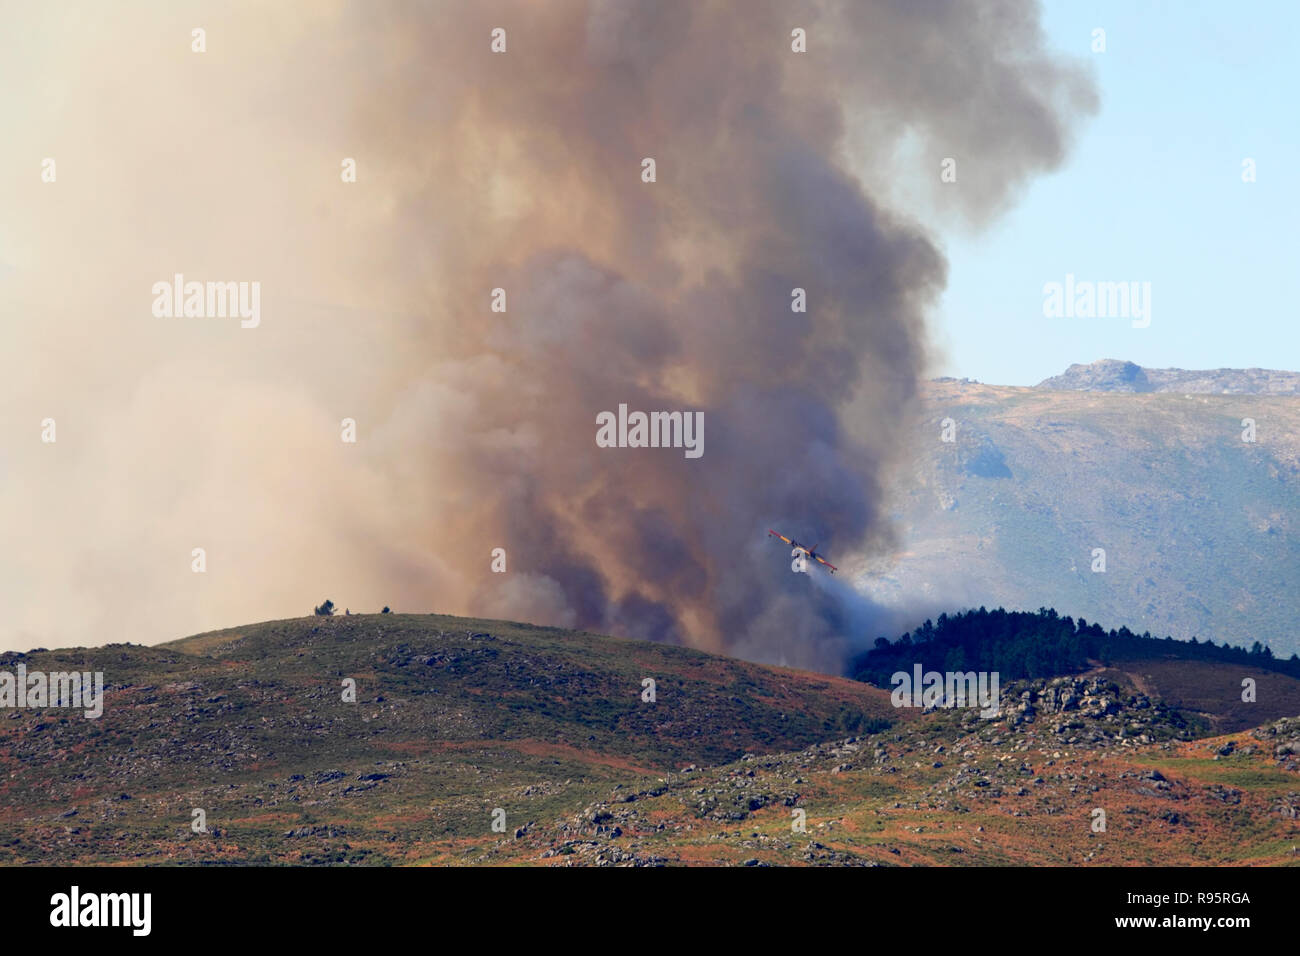 Big fire in the north of Portugal mountains seeing canadair plane in action Stock Photo